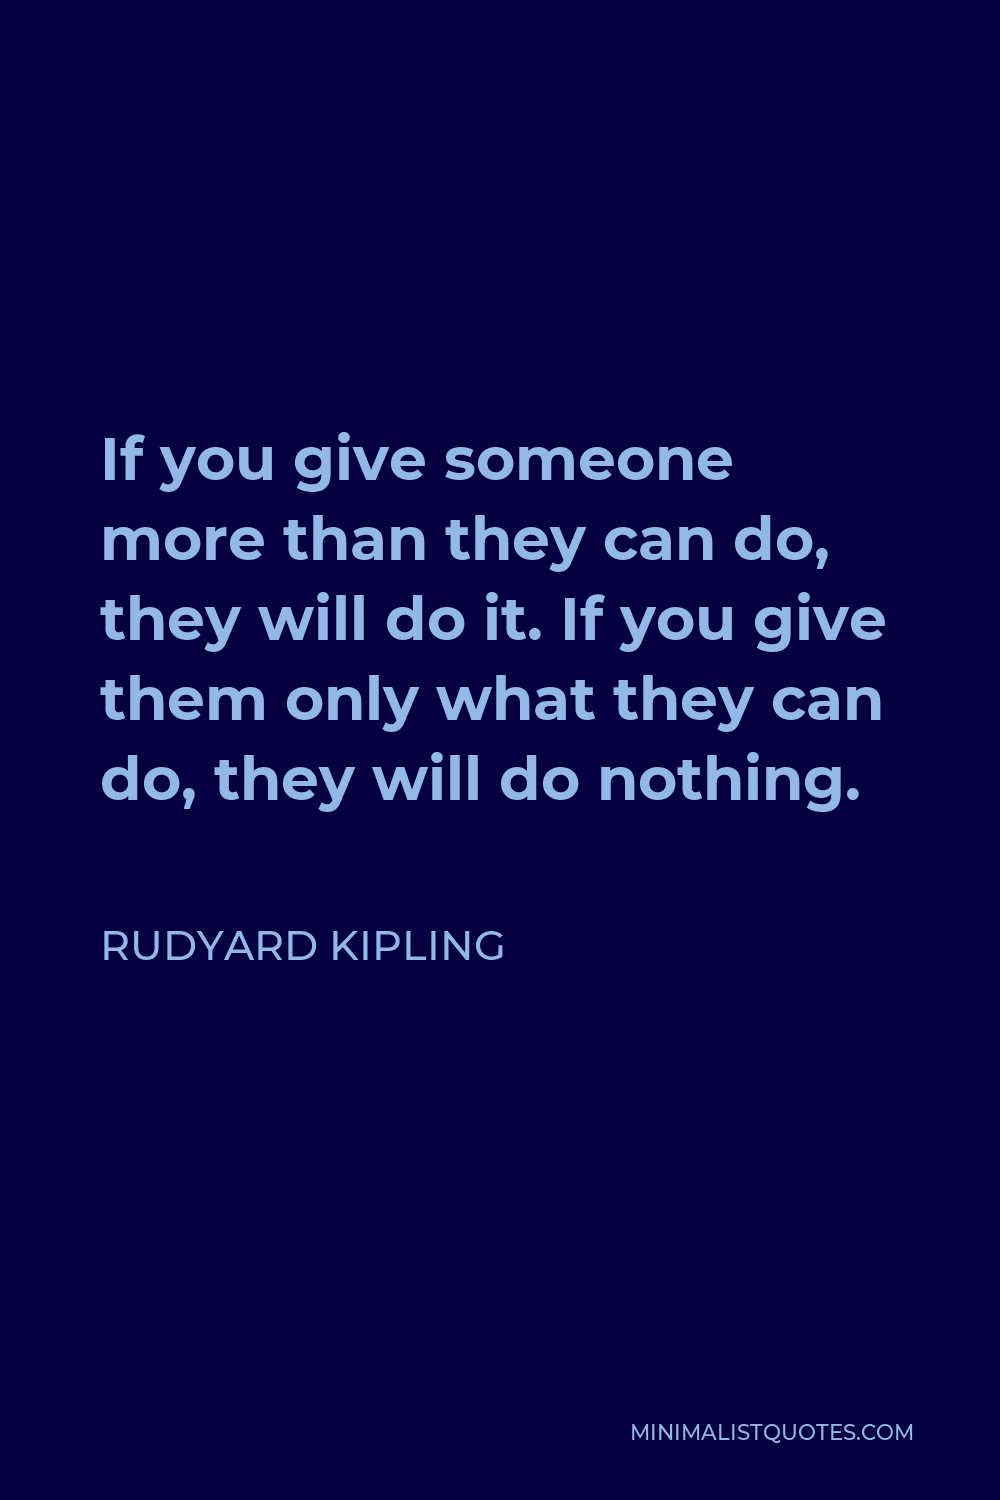 Rudyard Kipling Quote - If you give someone more than they can do, they will do it. If you give them only what they can do, they will do nothing.